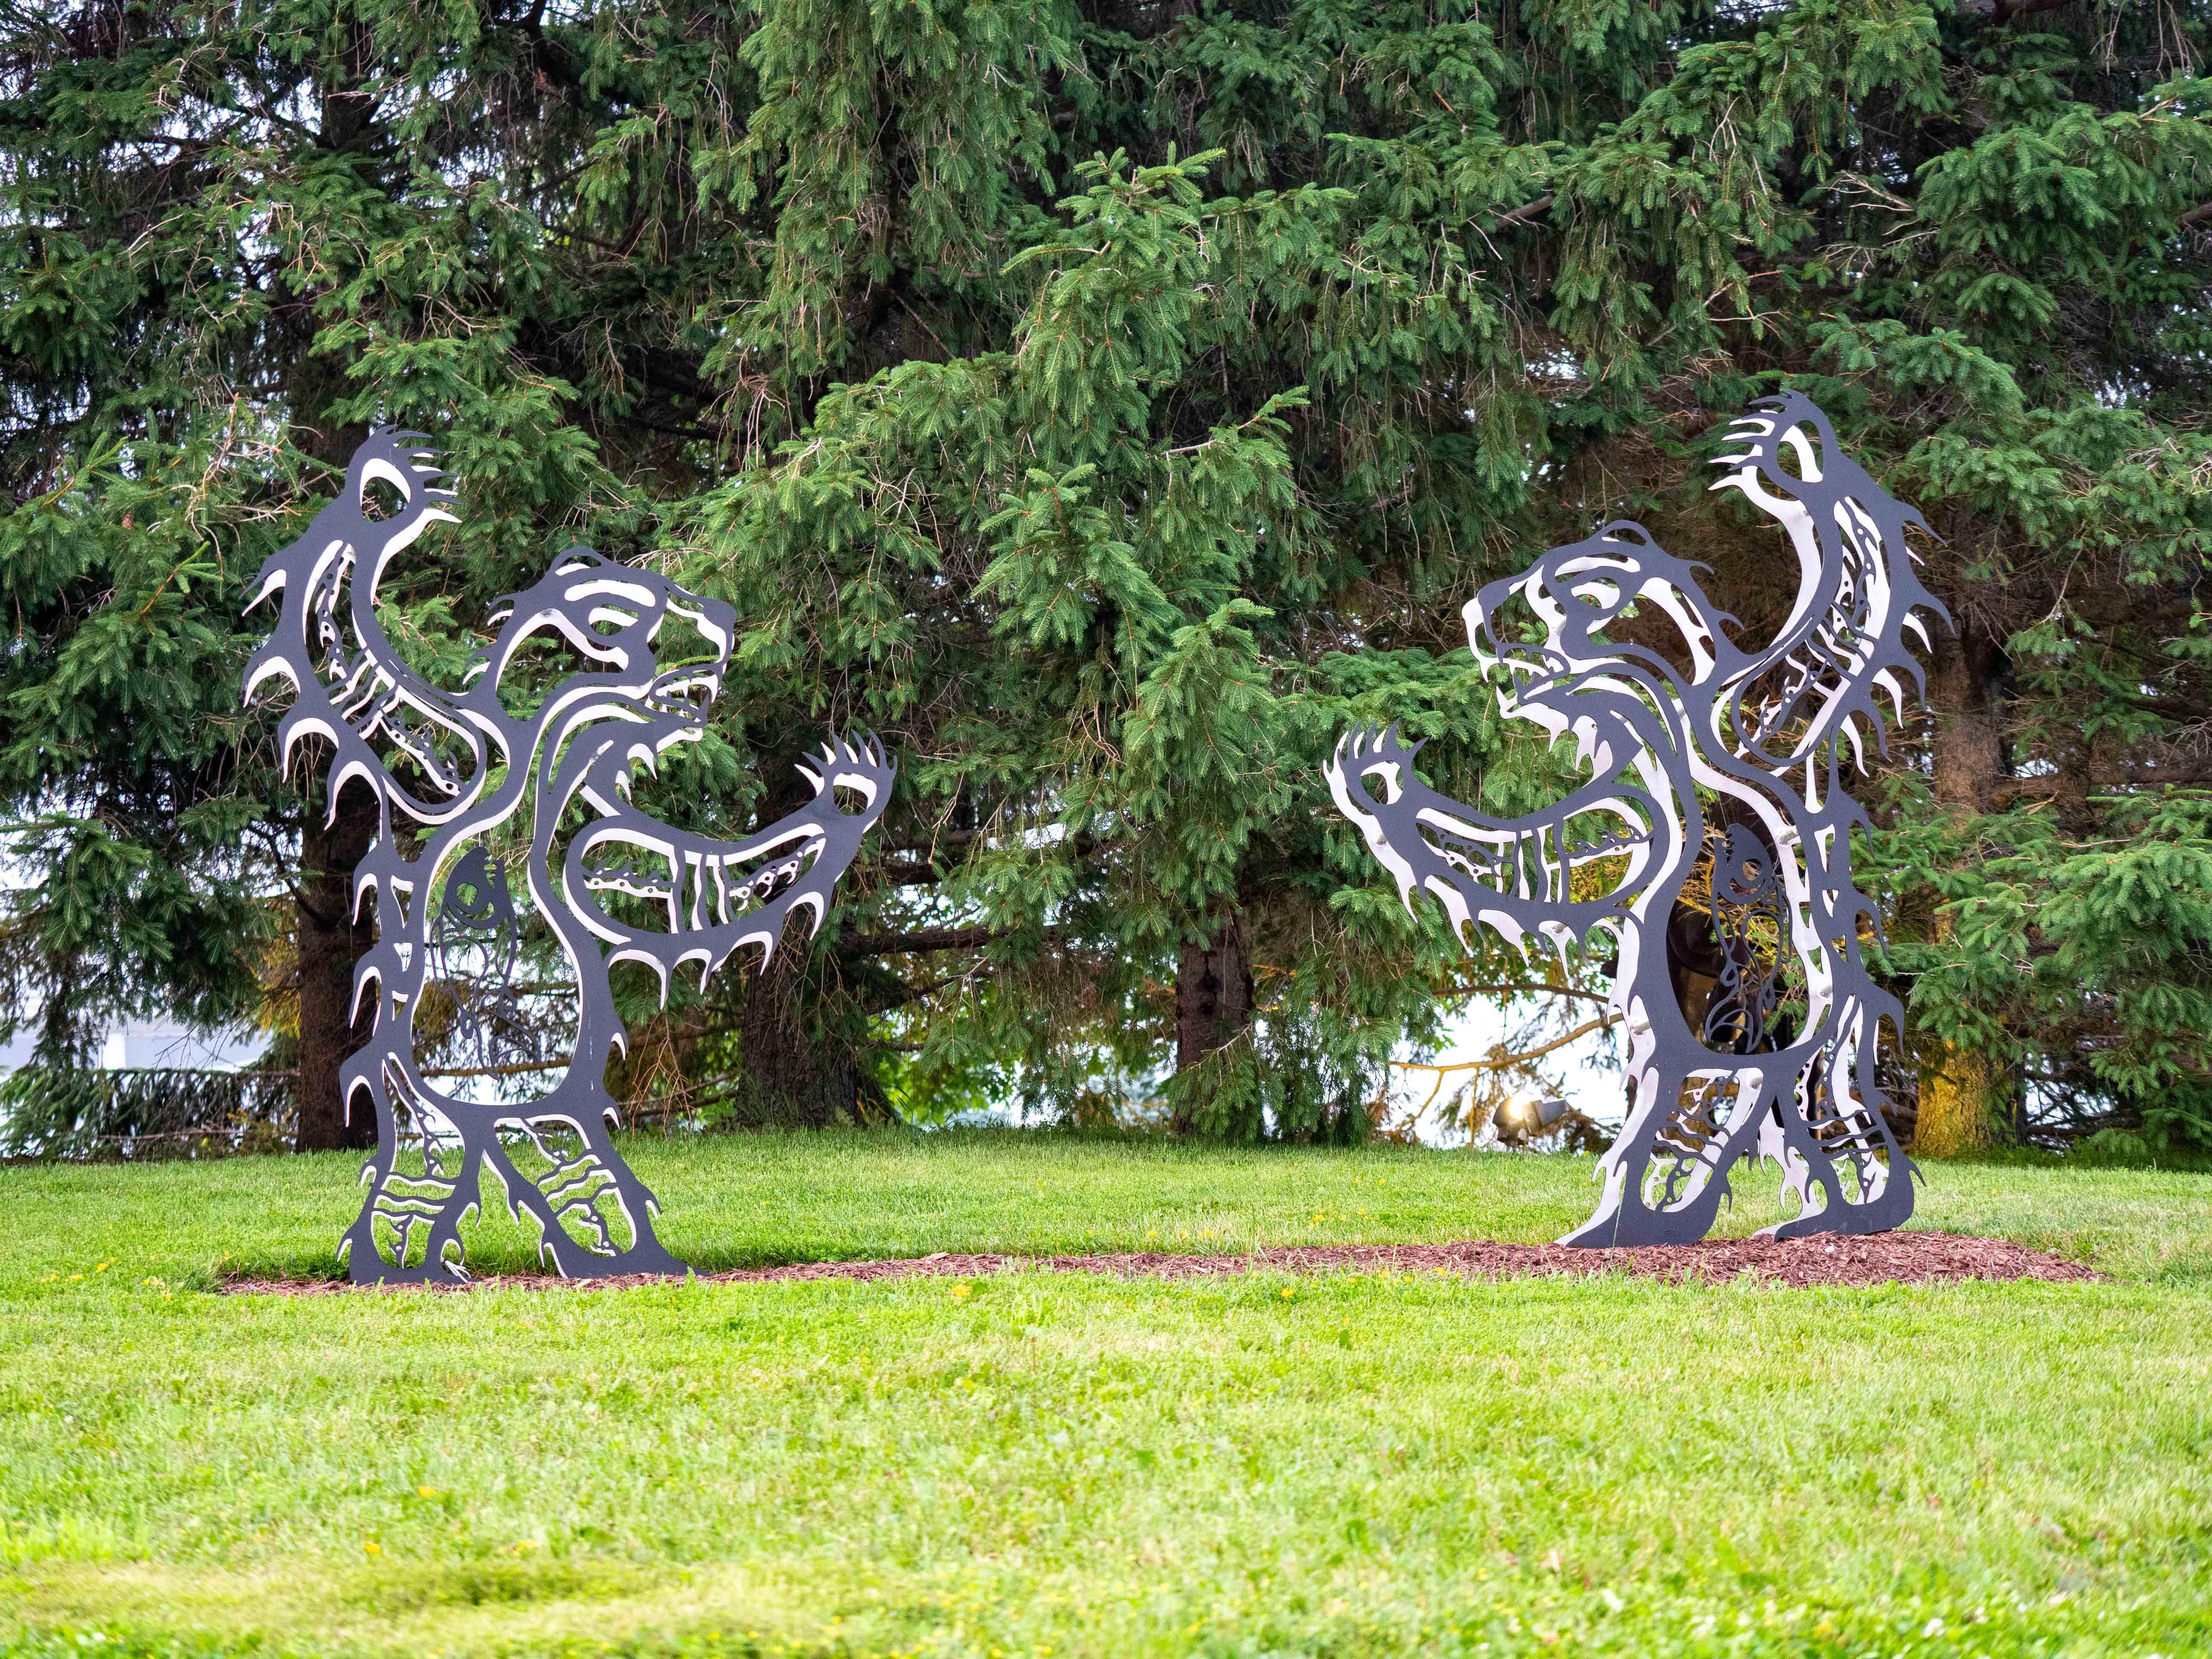 The majesty of woodland animals is celebrated in these striking metal sculptures by the Six Nations Mohawk artist Adam Monture. Monture’s beautiful paintings of woodland animals—bears, deer, wolves, turtles, loons and herons were re-imagined as